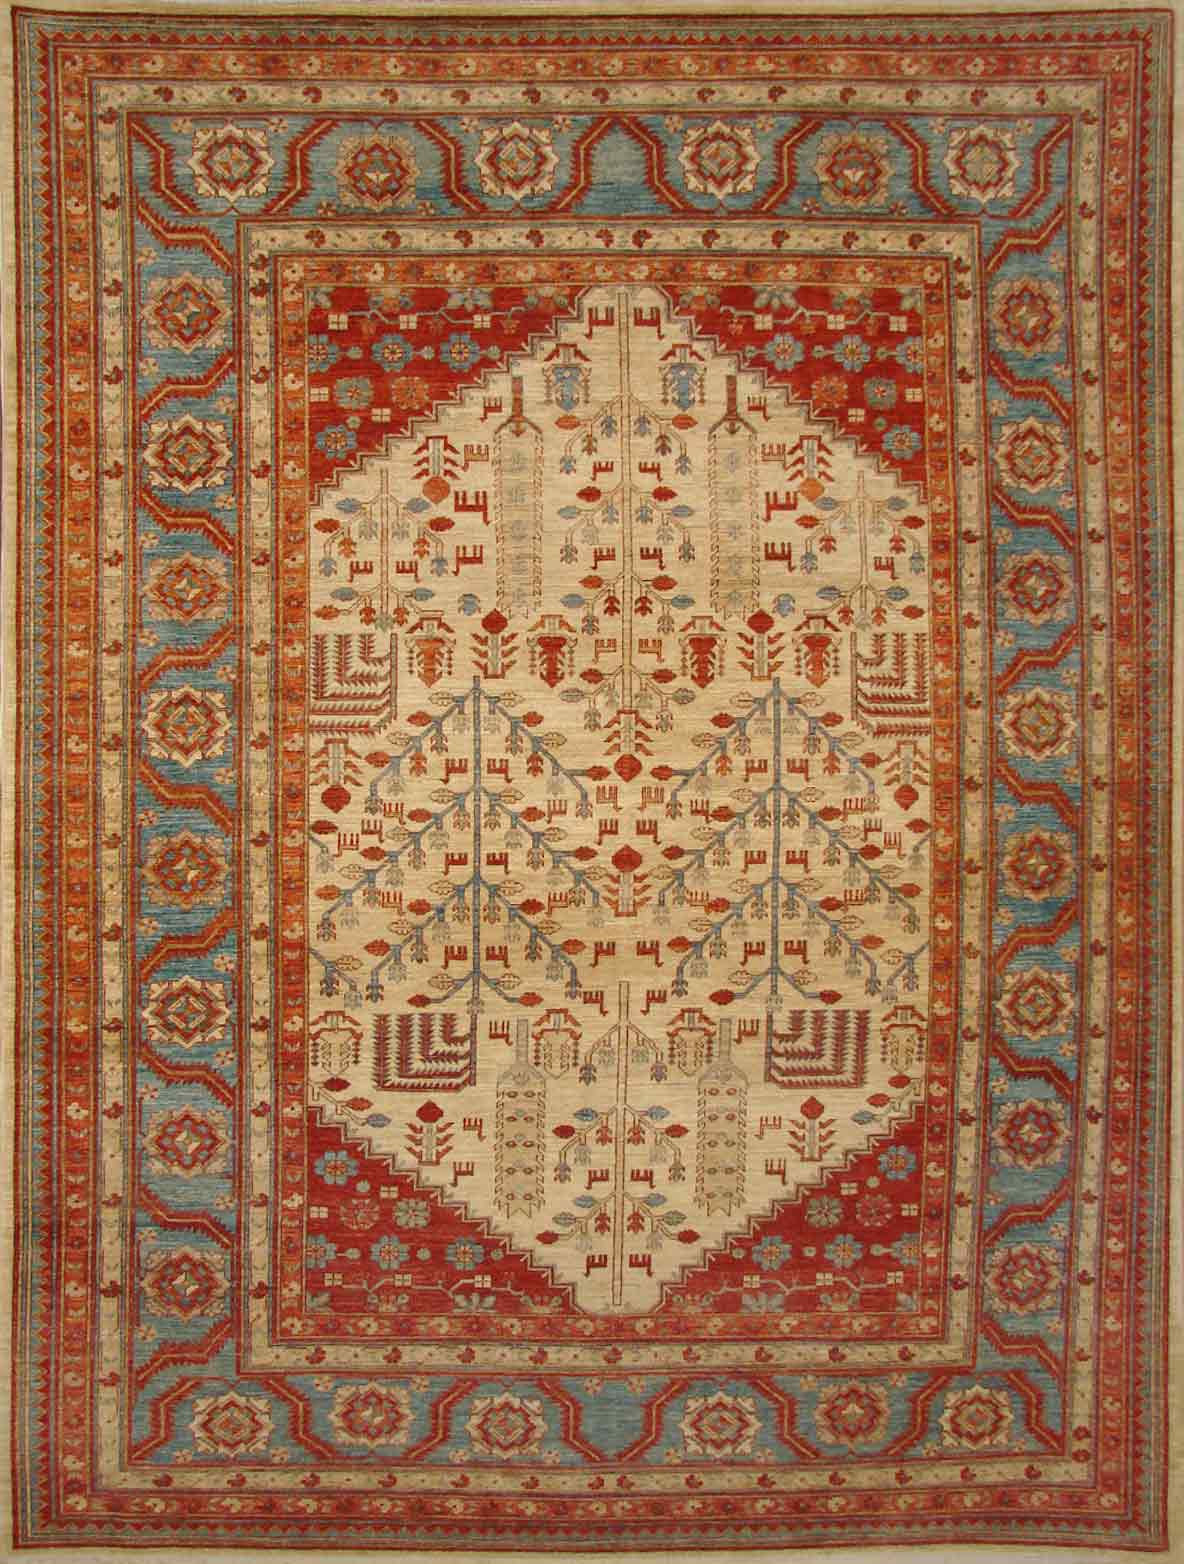 Antique Style Rugs ARYANA 19566 Ivory - Beige & Lt. Blue - Blue Hand Knotted Rug